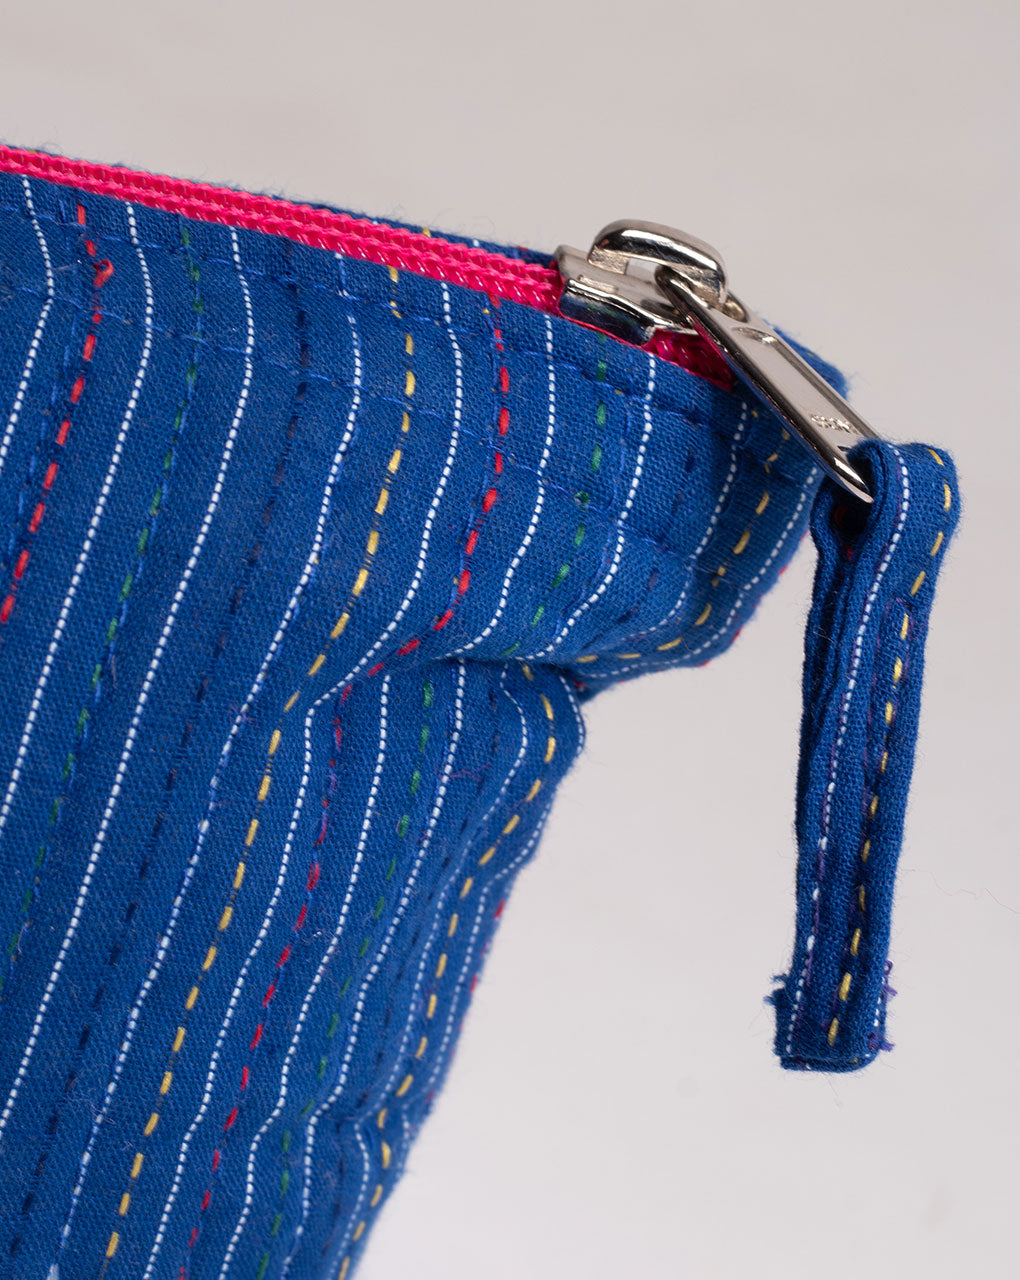 Upcycled Kantha Stripes Pouch - Fabriclore.com